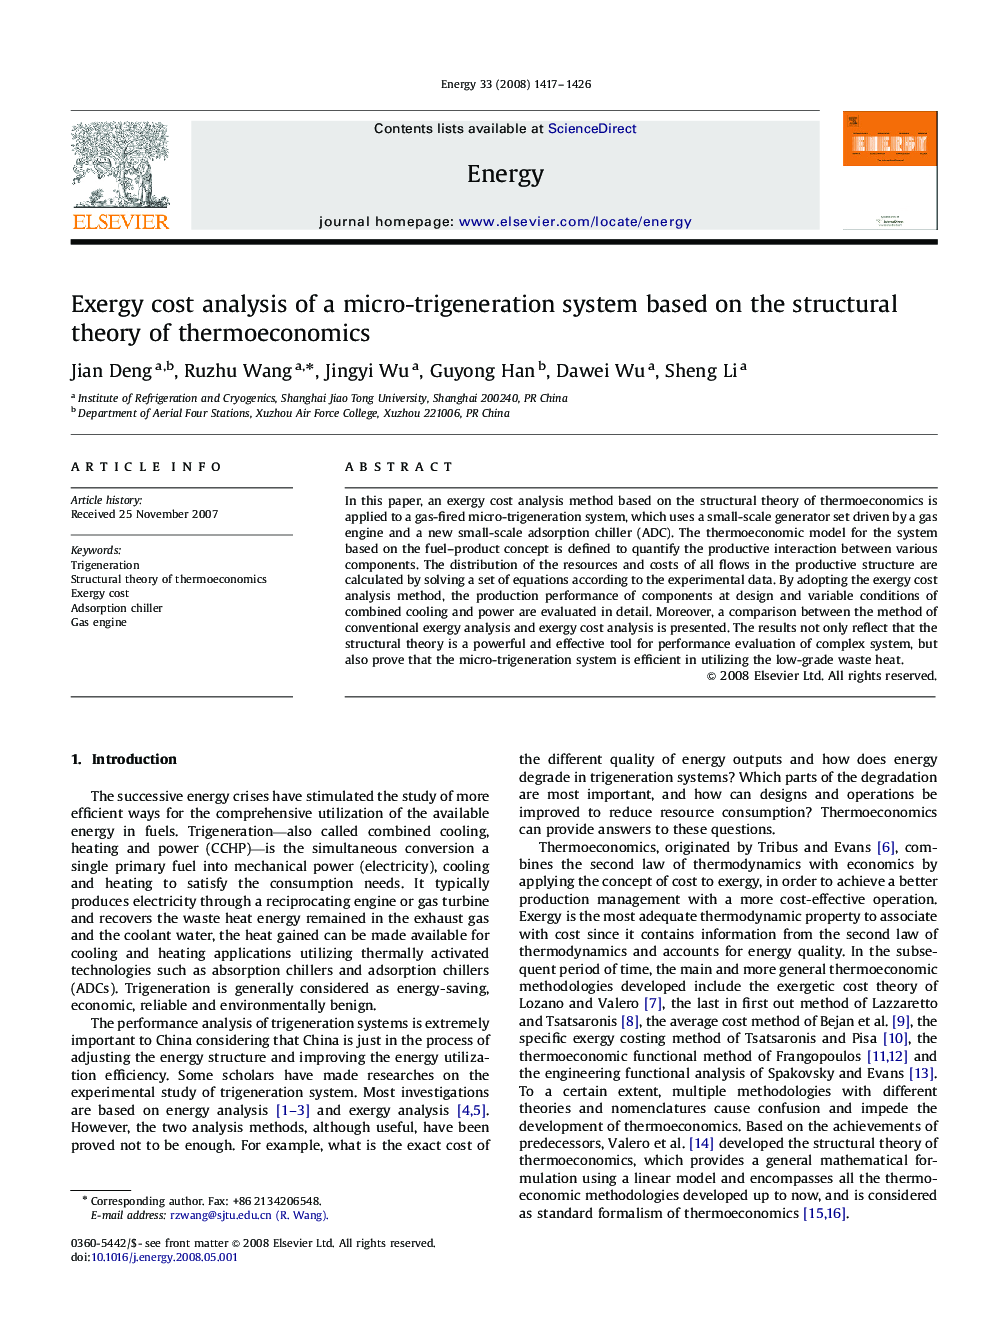 Exergy cost analysis of a micro-trigeneration system based on the structural theory of thermoeconomics